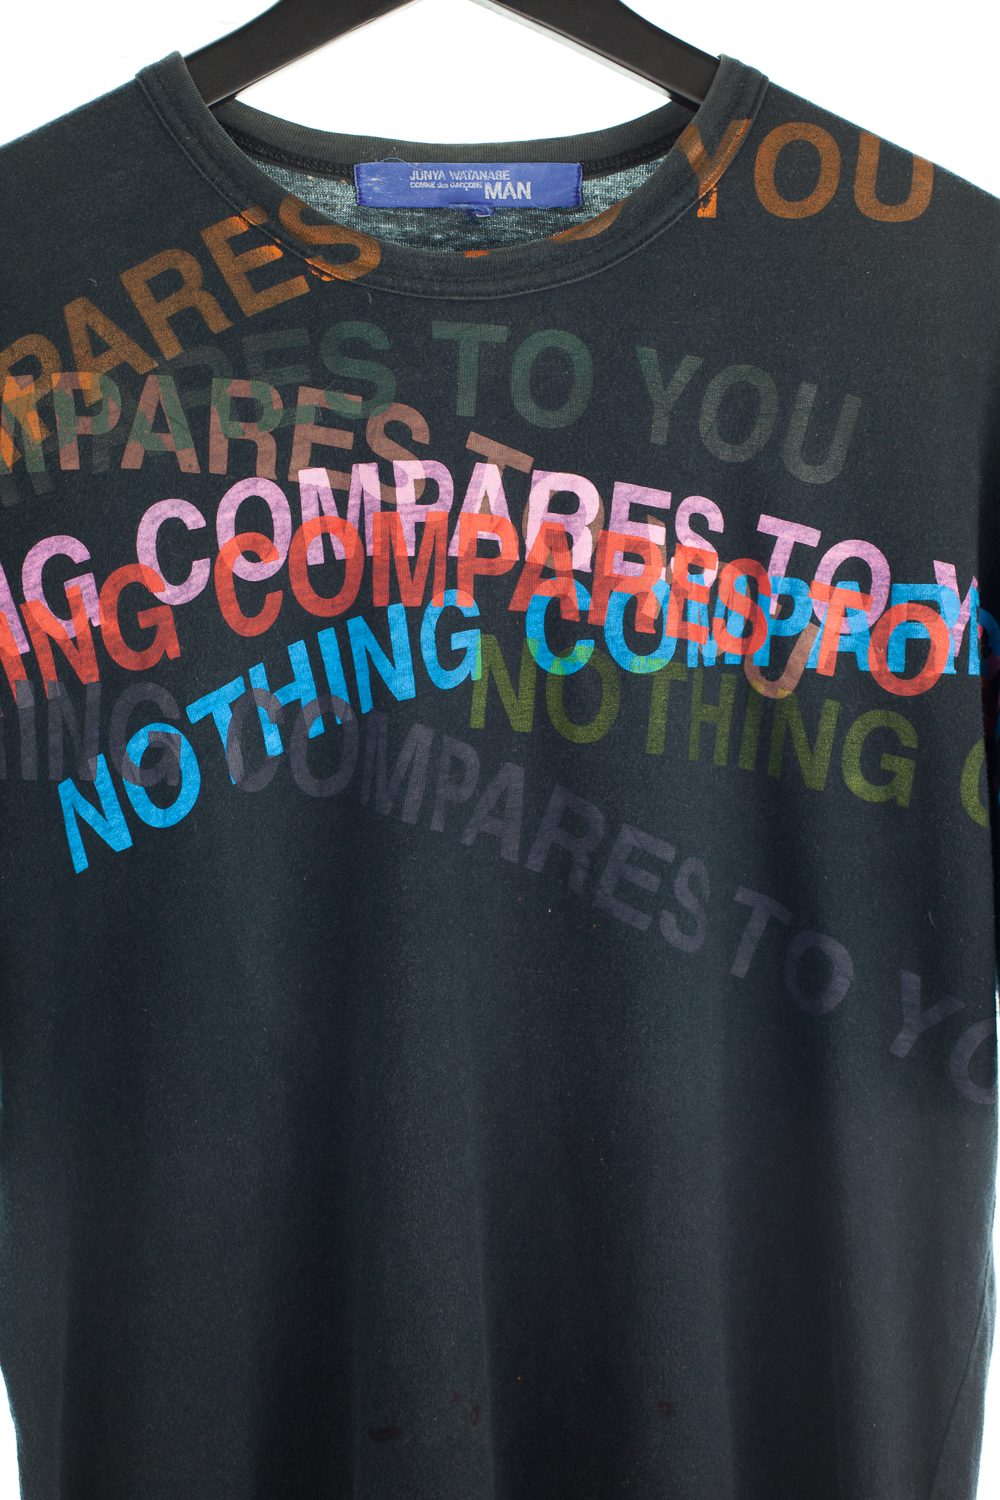 2001 “Nothing Compares To You” Tee